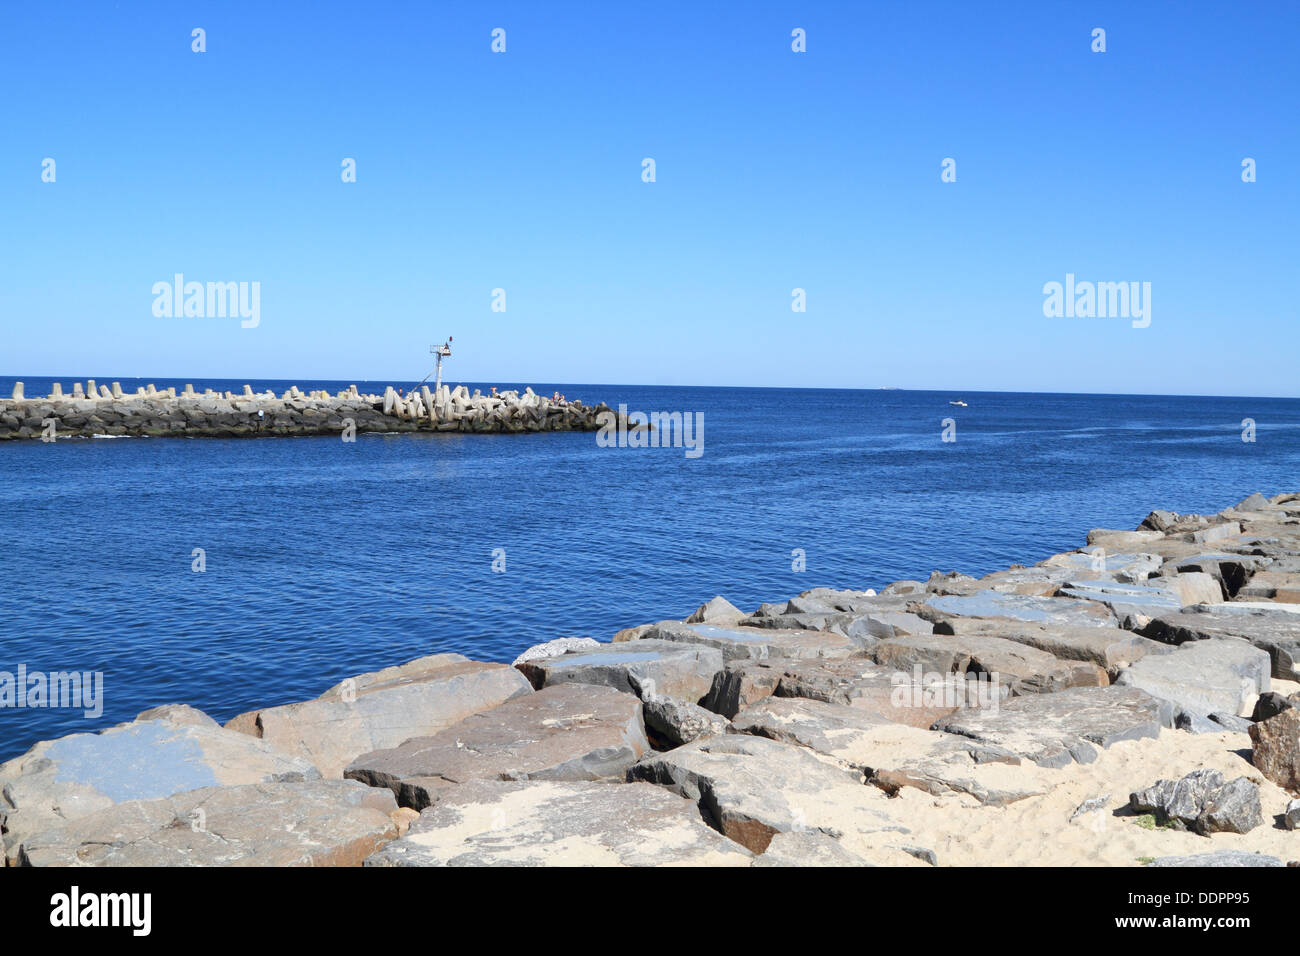 The Manasquan Inlet allowing access to the Atlantic Ocean. Point Pleasant Beach, New Jersey, USA Stock Photo